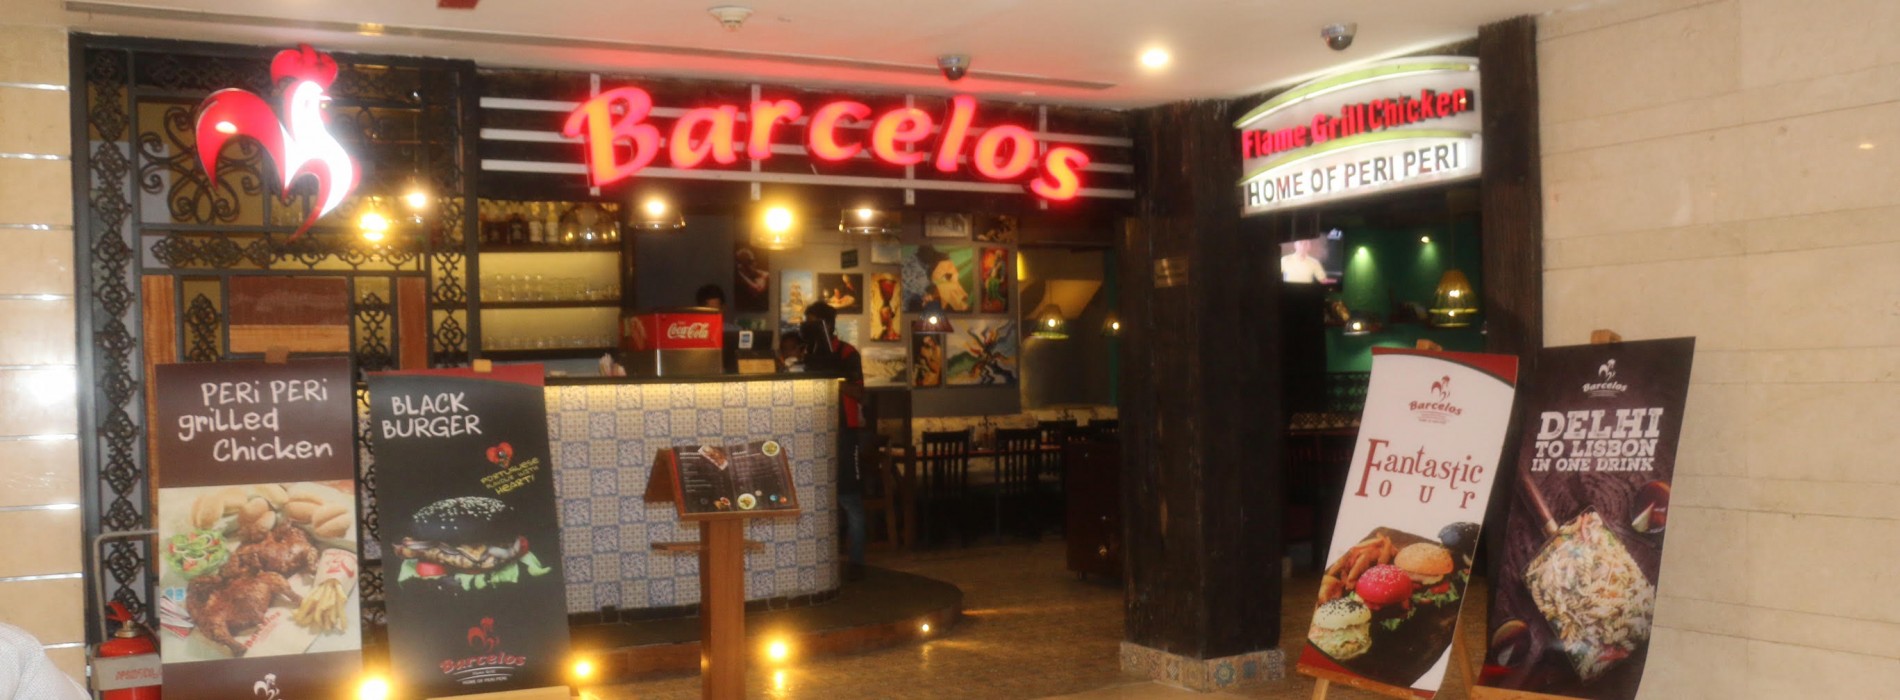 Betting on youth, Barcelos aims high in Indian Market